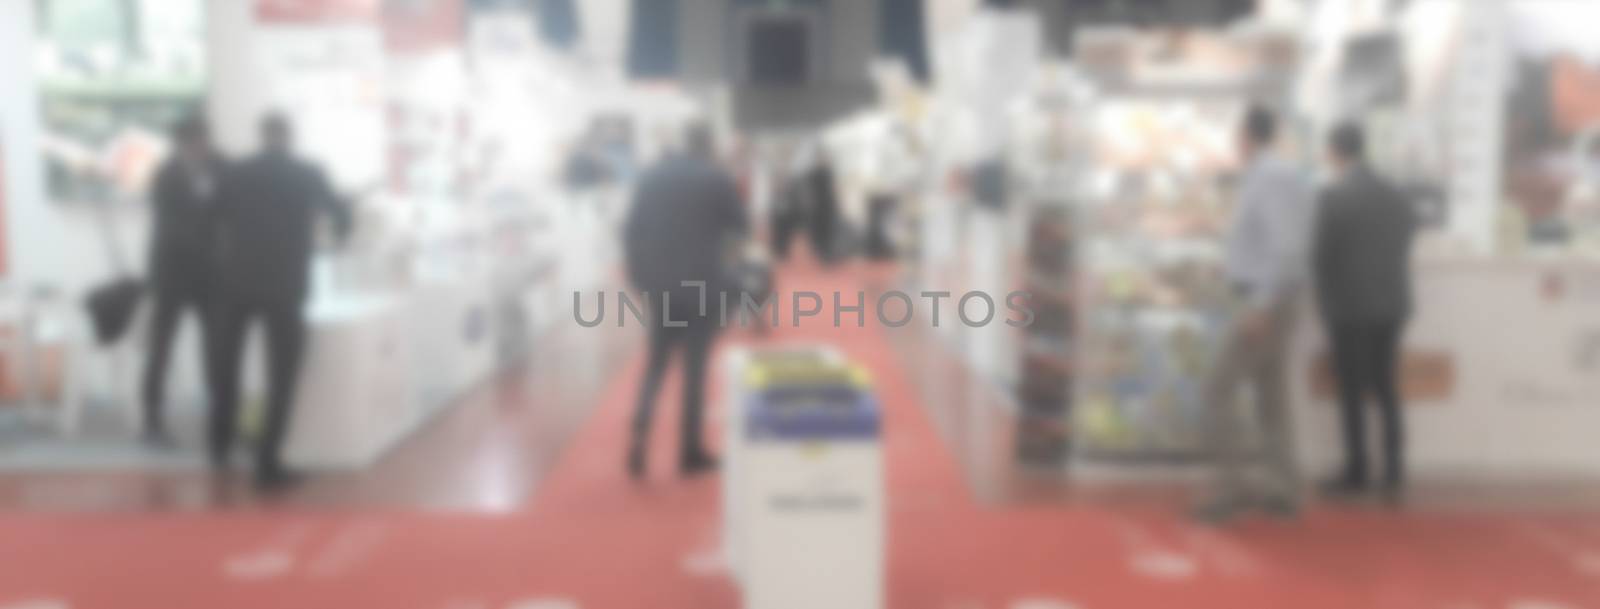 Defocused background of a trade show by marcorubino